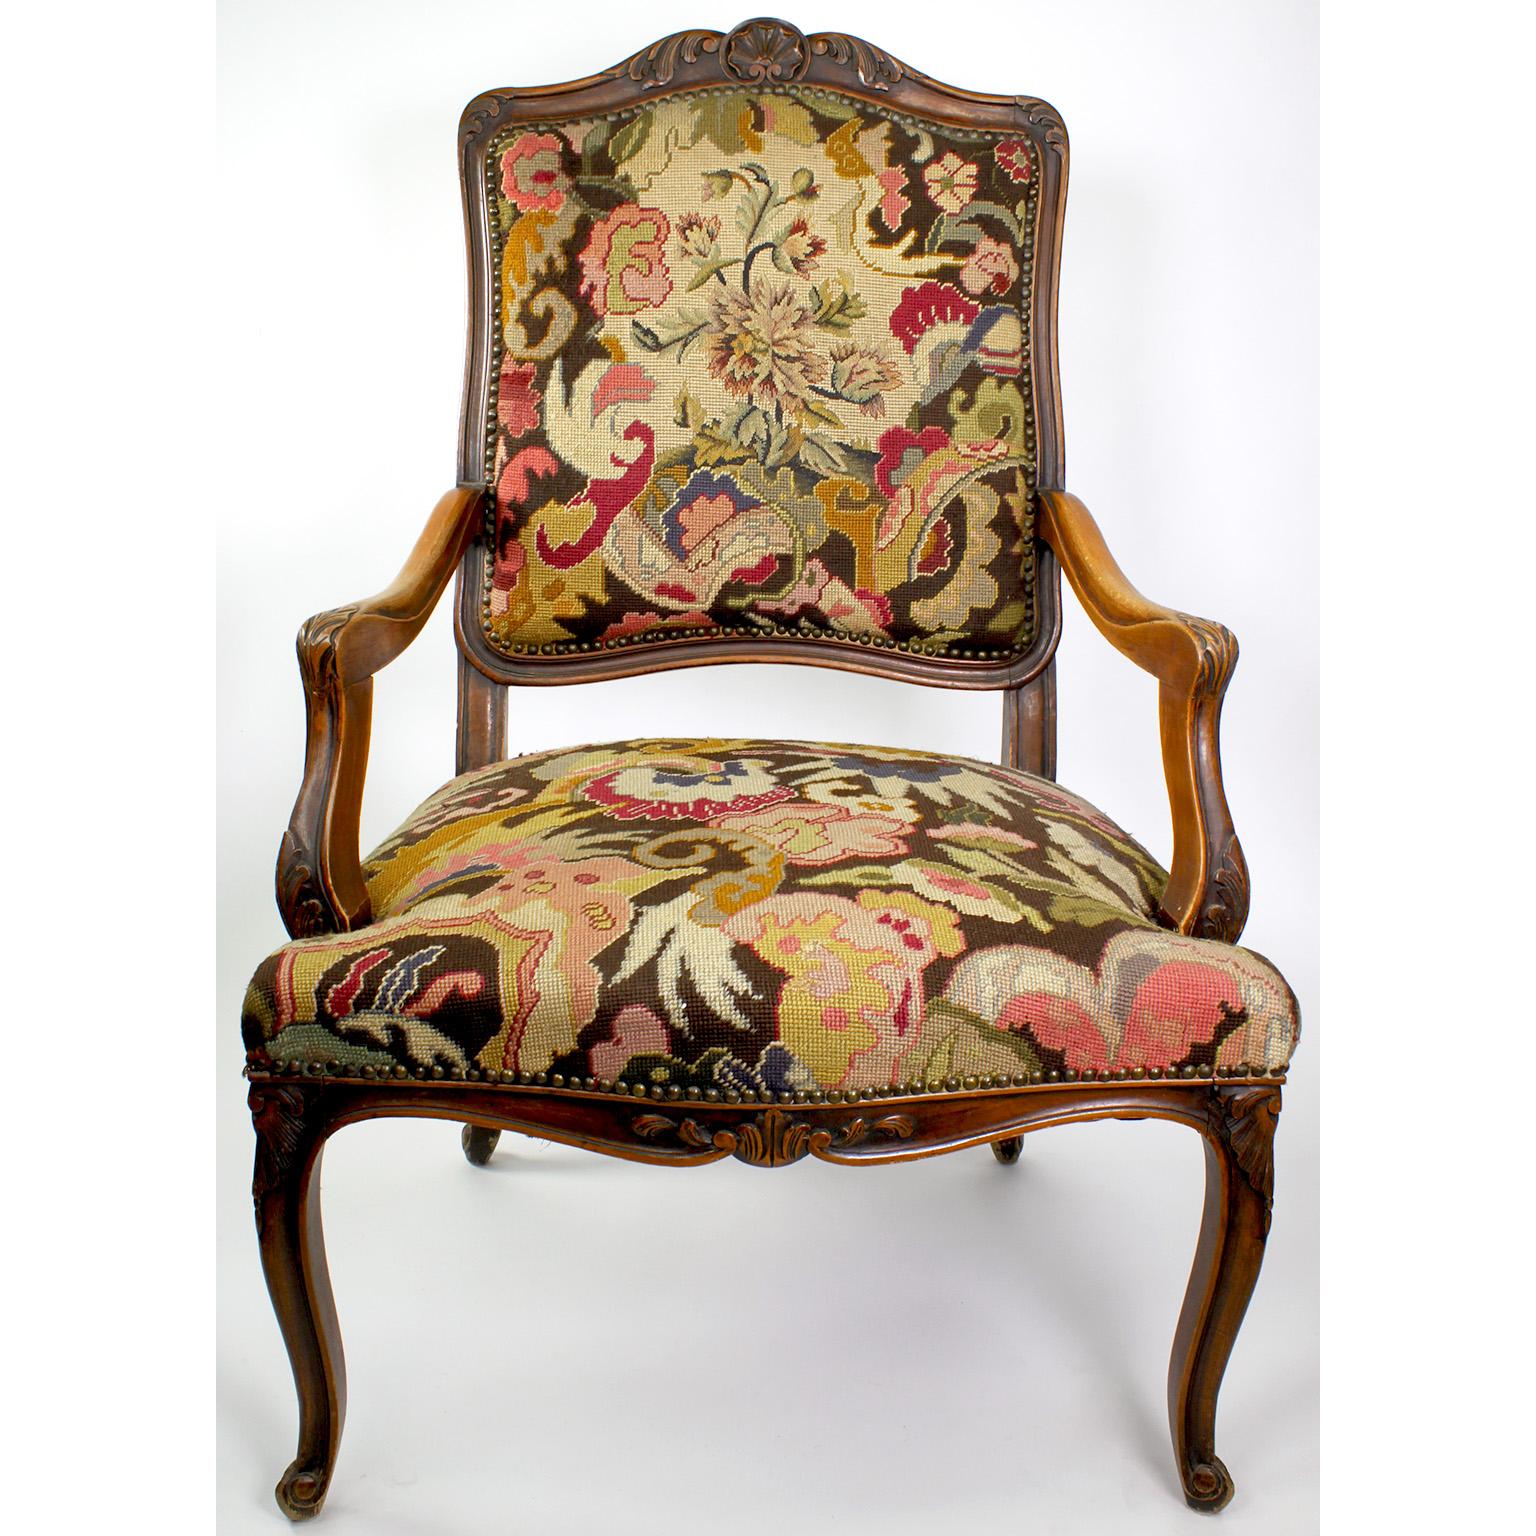 A fine Country French 19th-20th century Louis XV style carved walnut Fauteuil à la Reine armchair. The finely carved wood frame with open scrolled armrests and cabriolet legs, upholstered in a needlepoint tapestry. Circa: 1900.

Measures: Height: